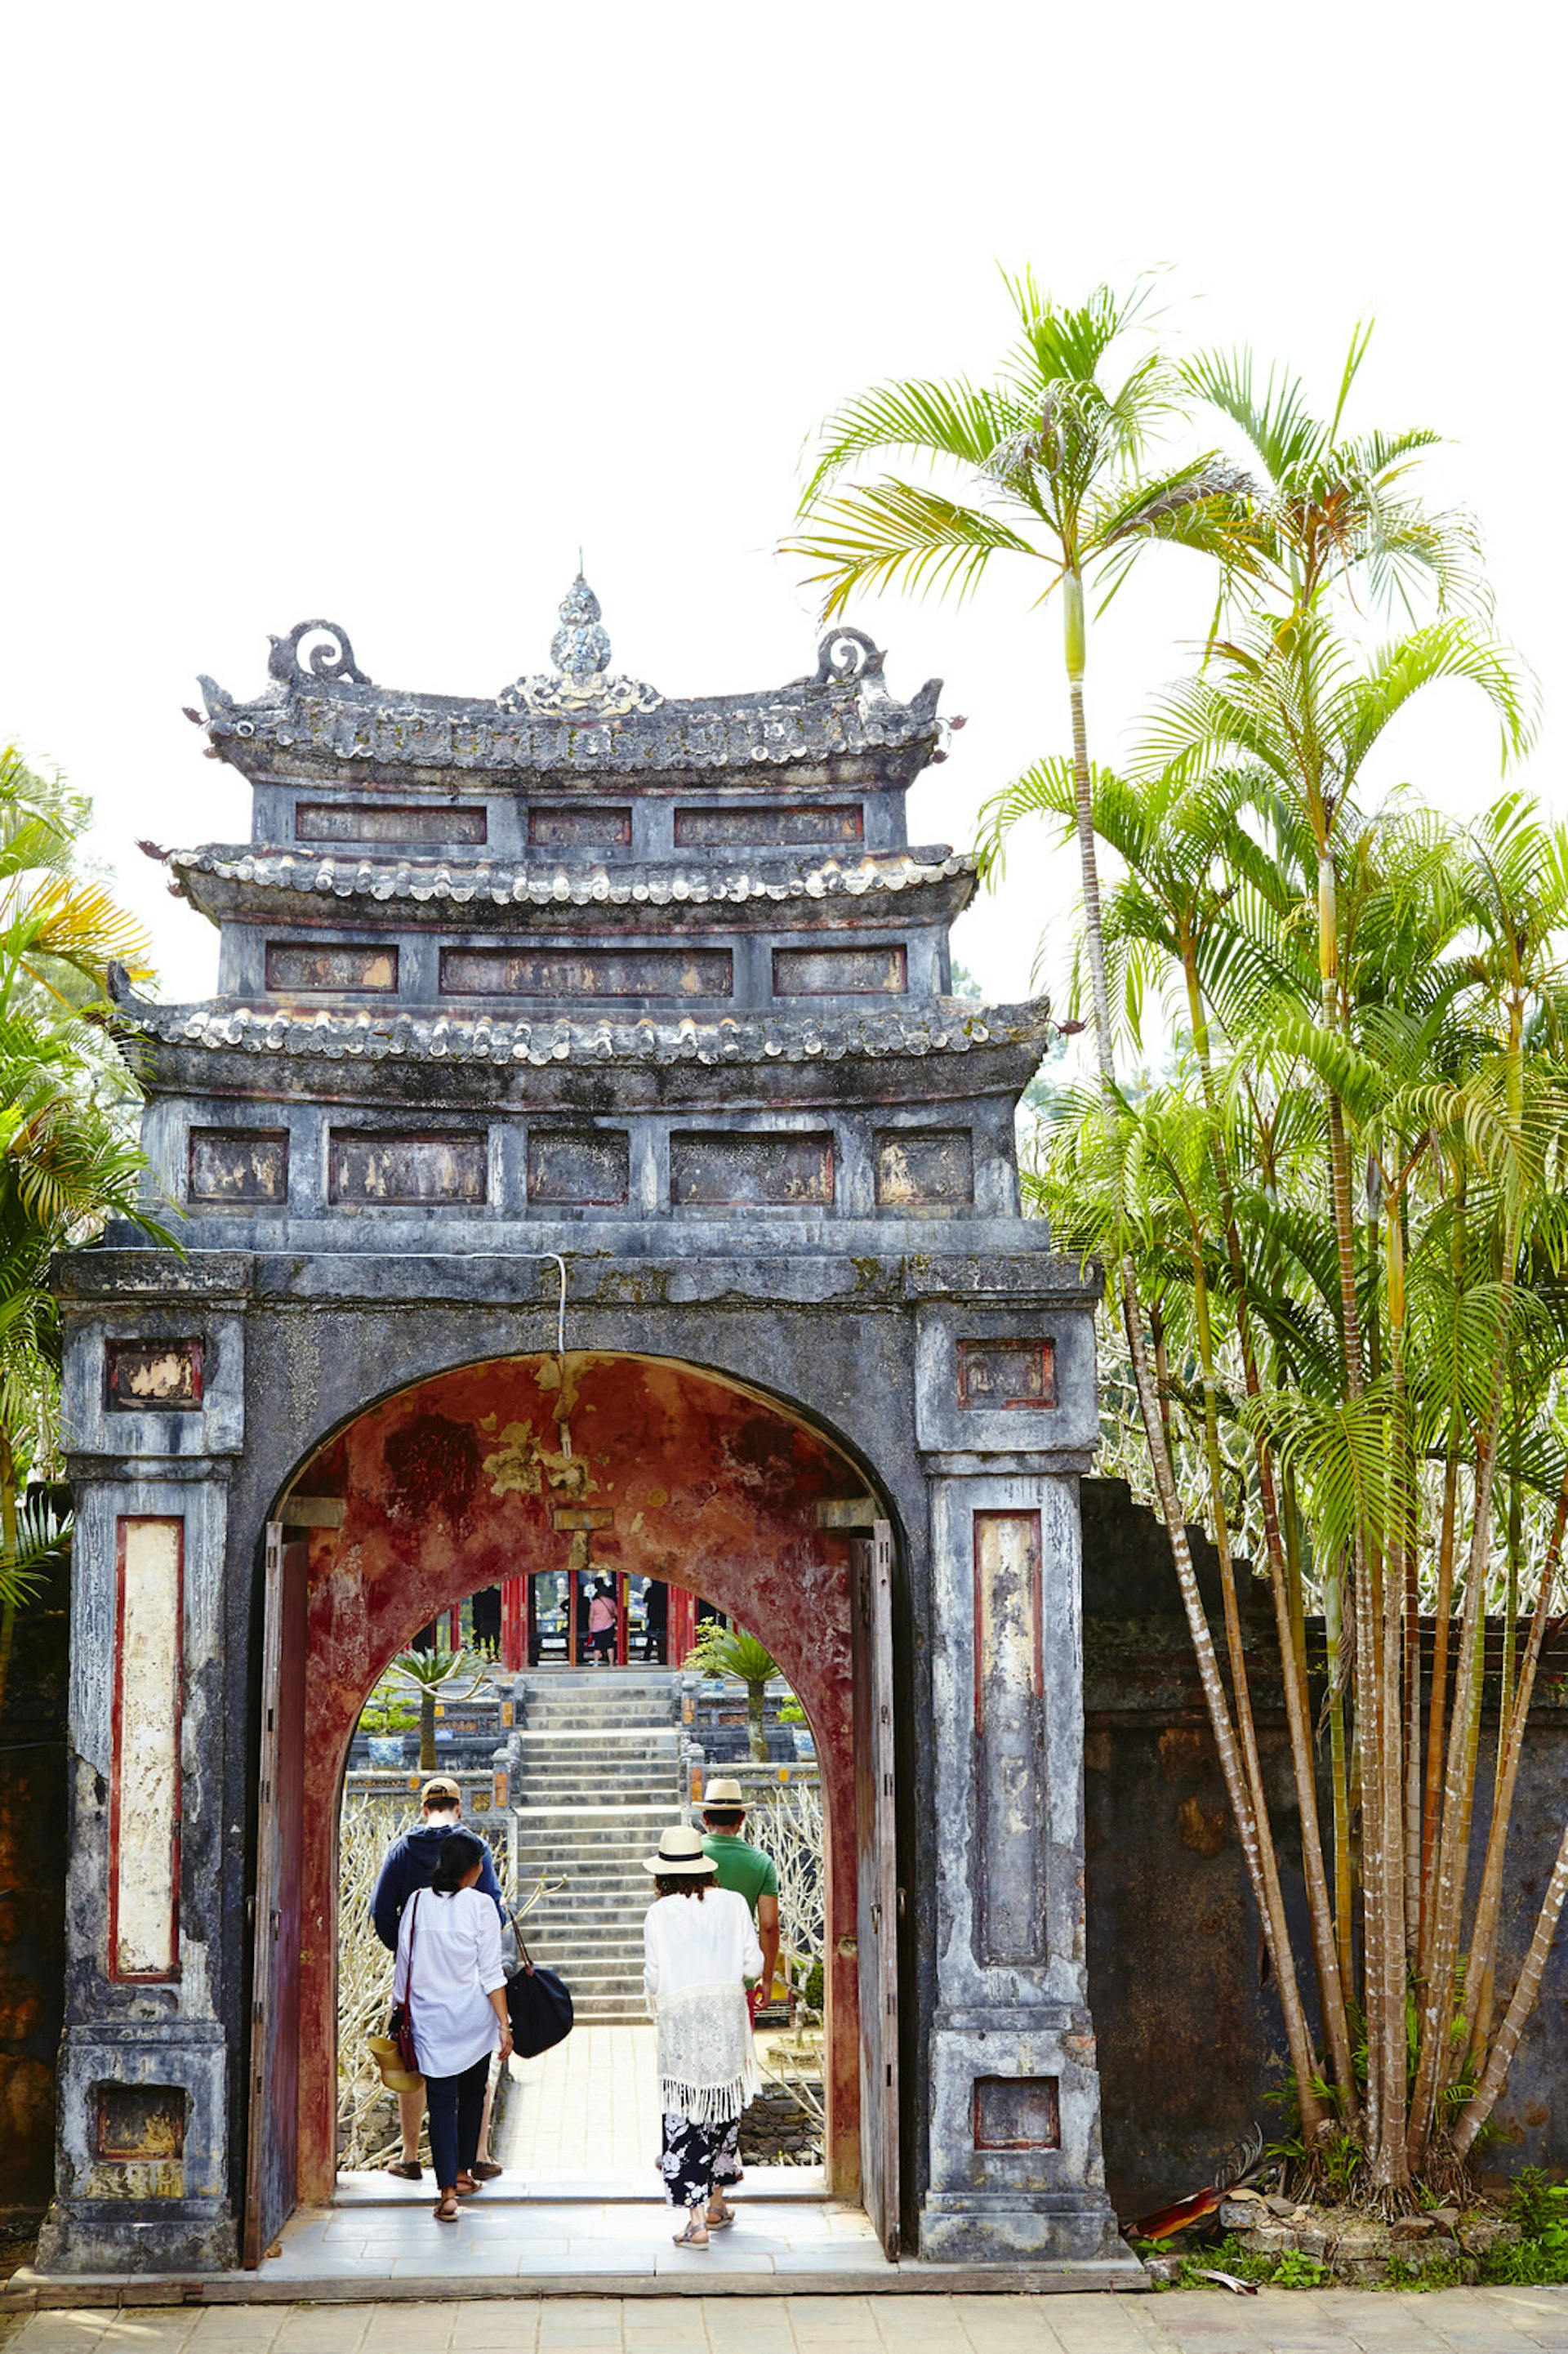 One of the 10 main entrances into the Imperial City of Hue © Matt Munro / Lonely Planet